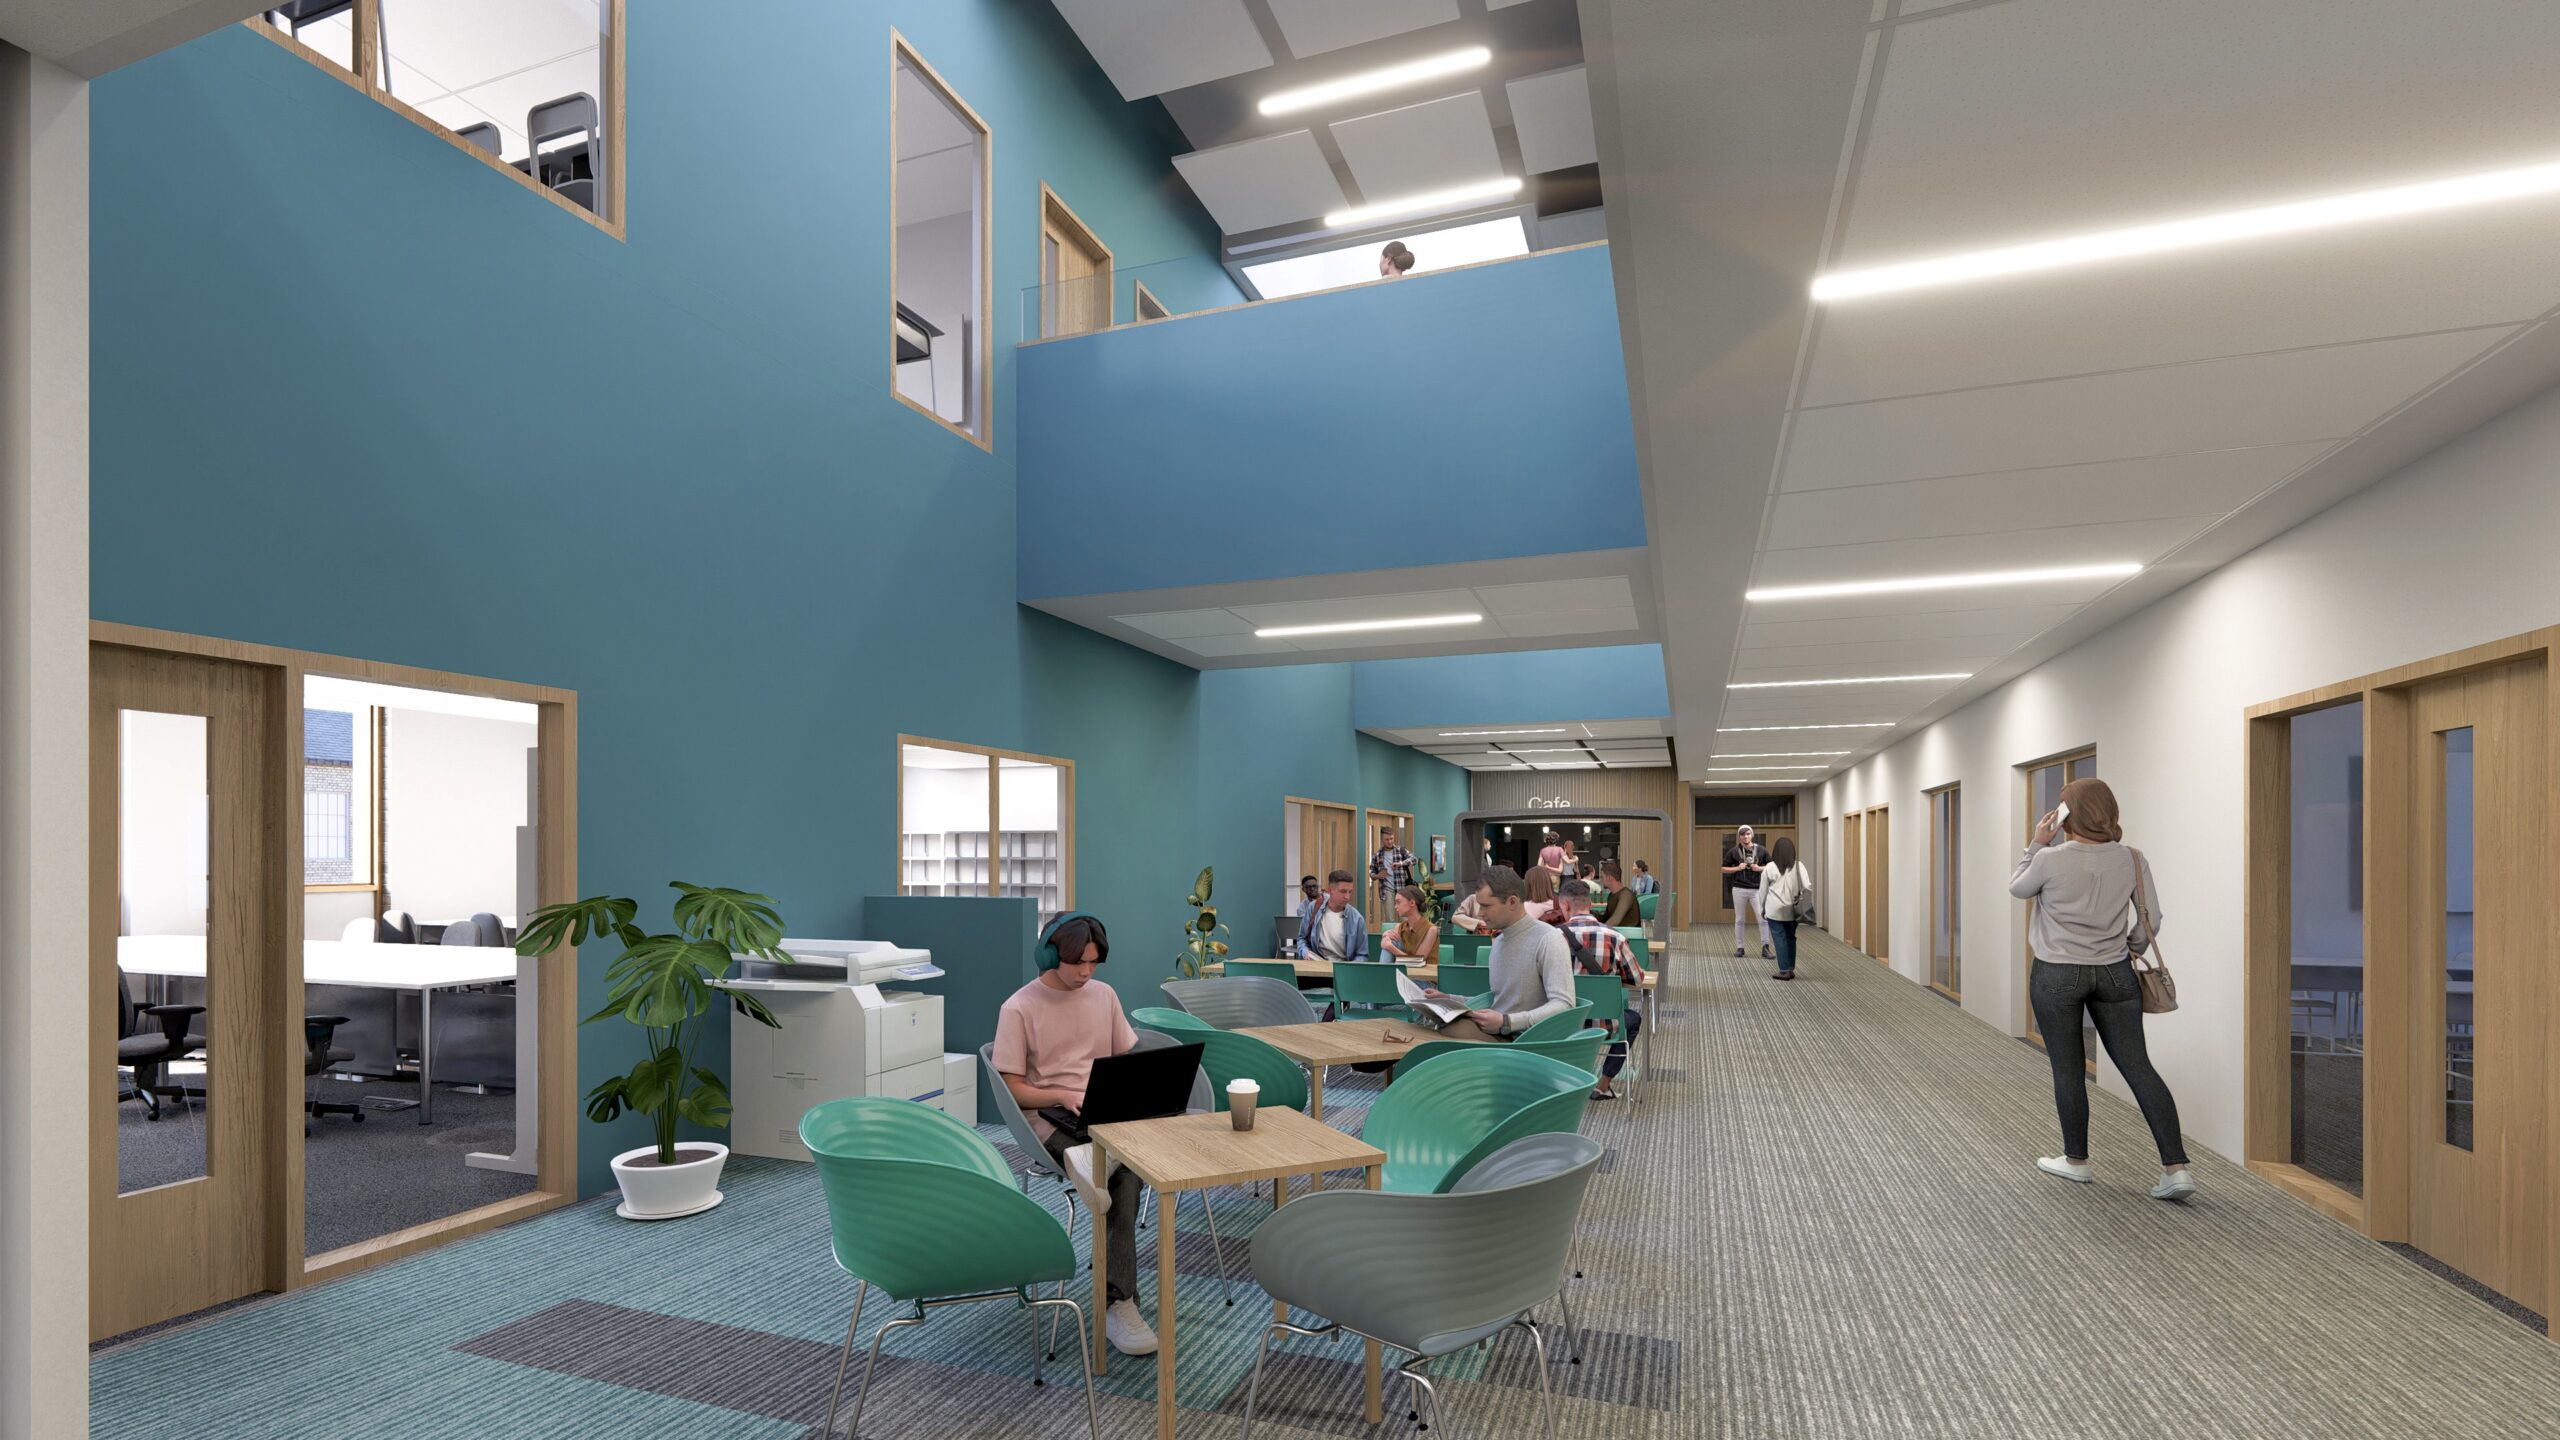 a proposed image of the inside of the FTC building, with desks and seats and classrooms